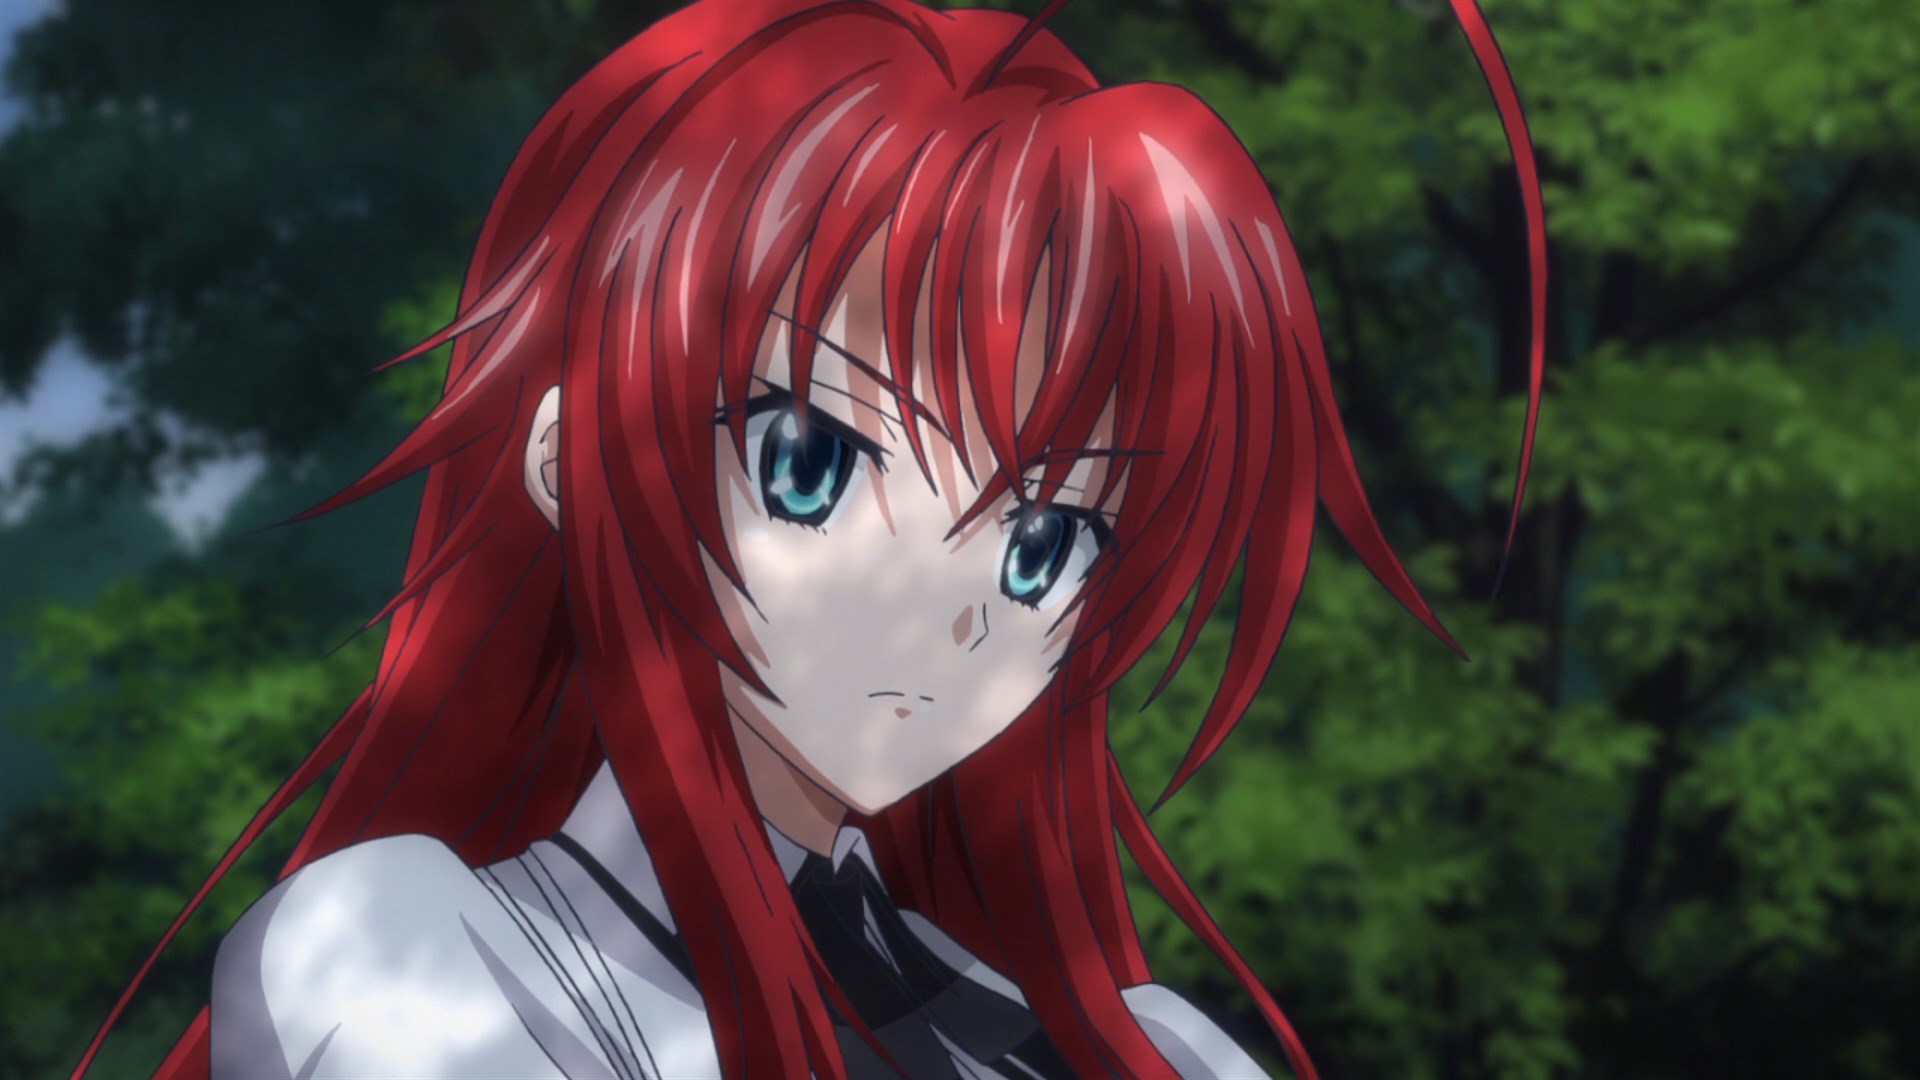 High School DxD New Wallpapers High Quality | Download Free